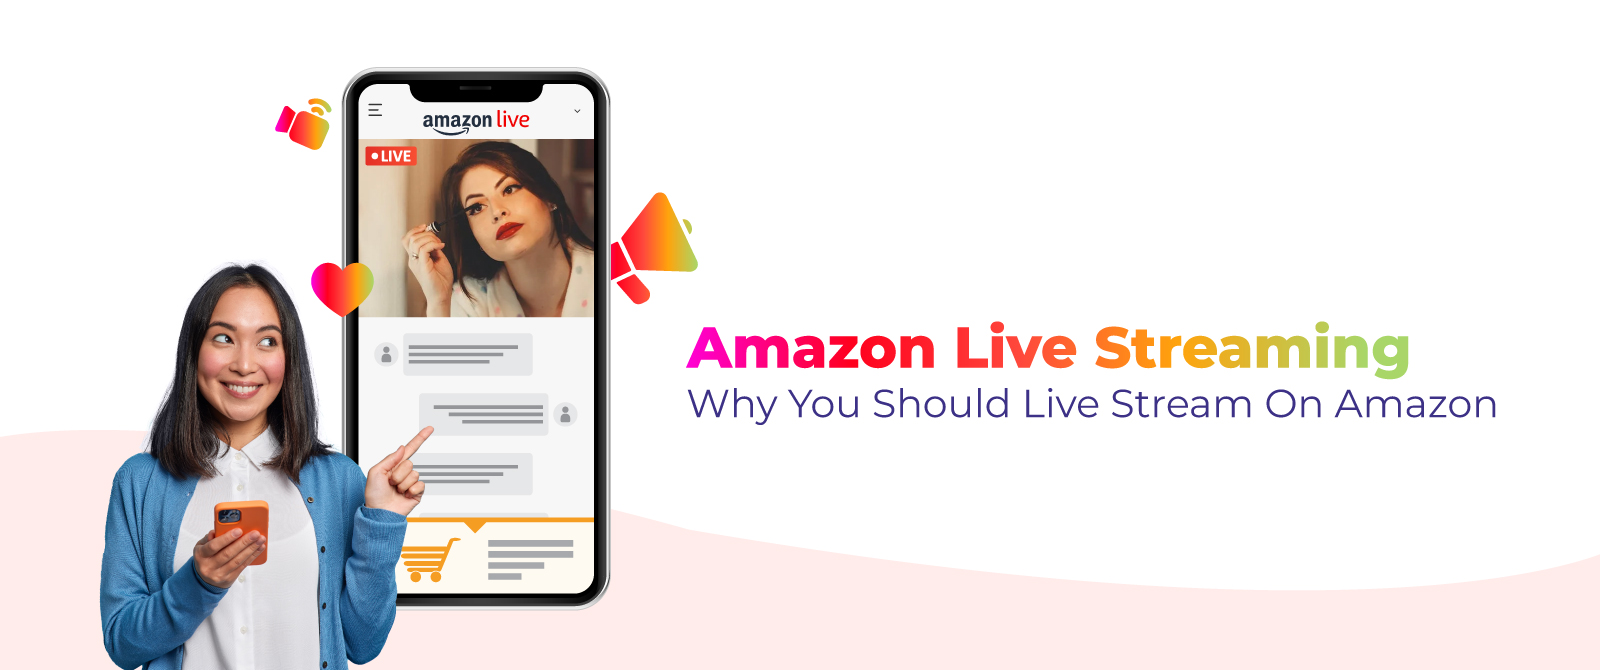 Amazon Live streaming: Why you should live stream on Amazon